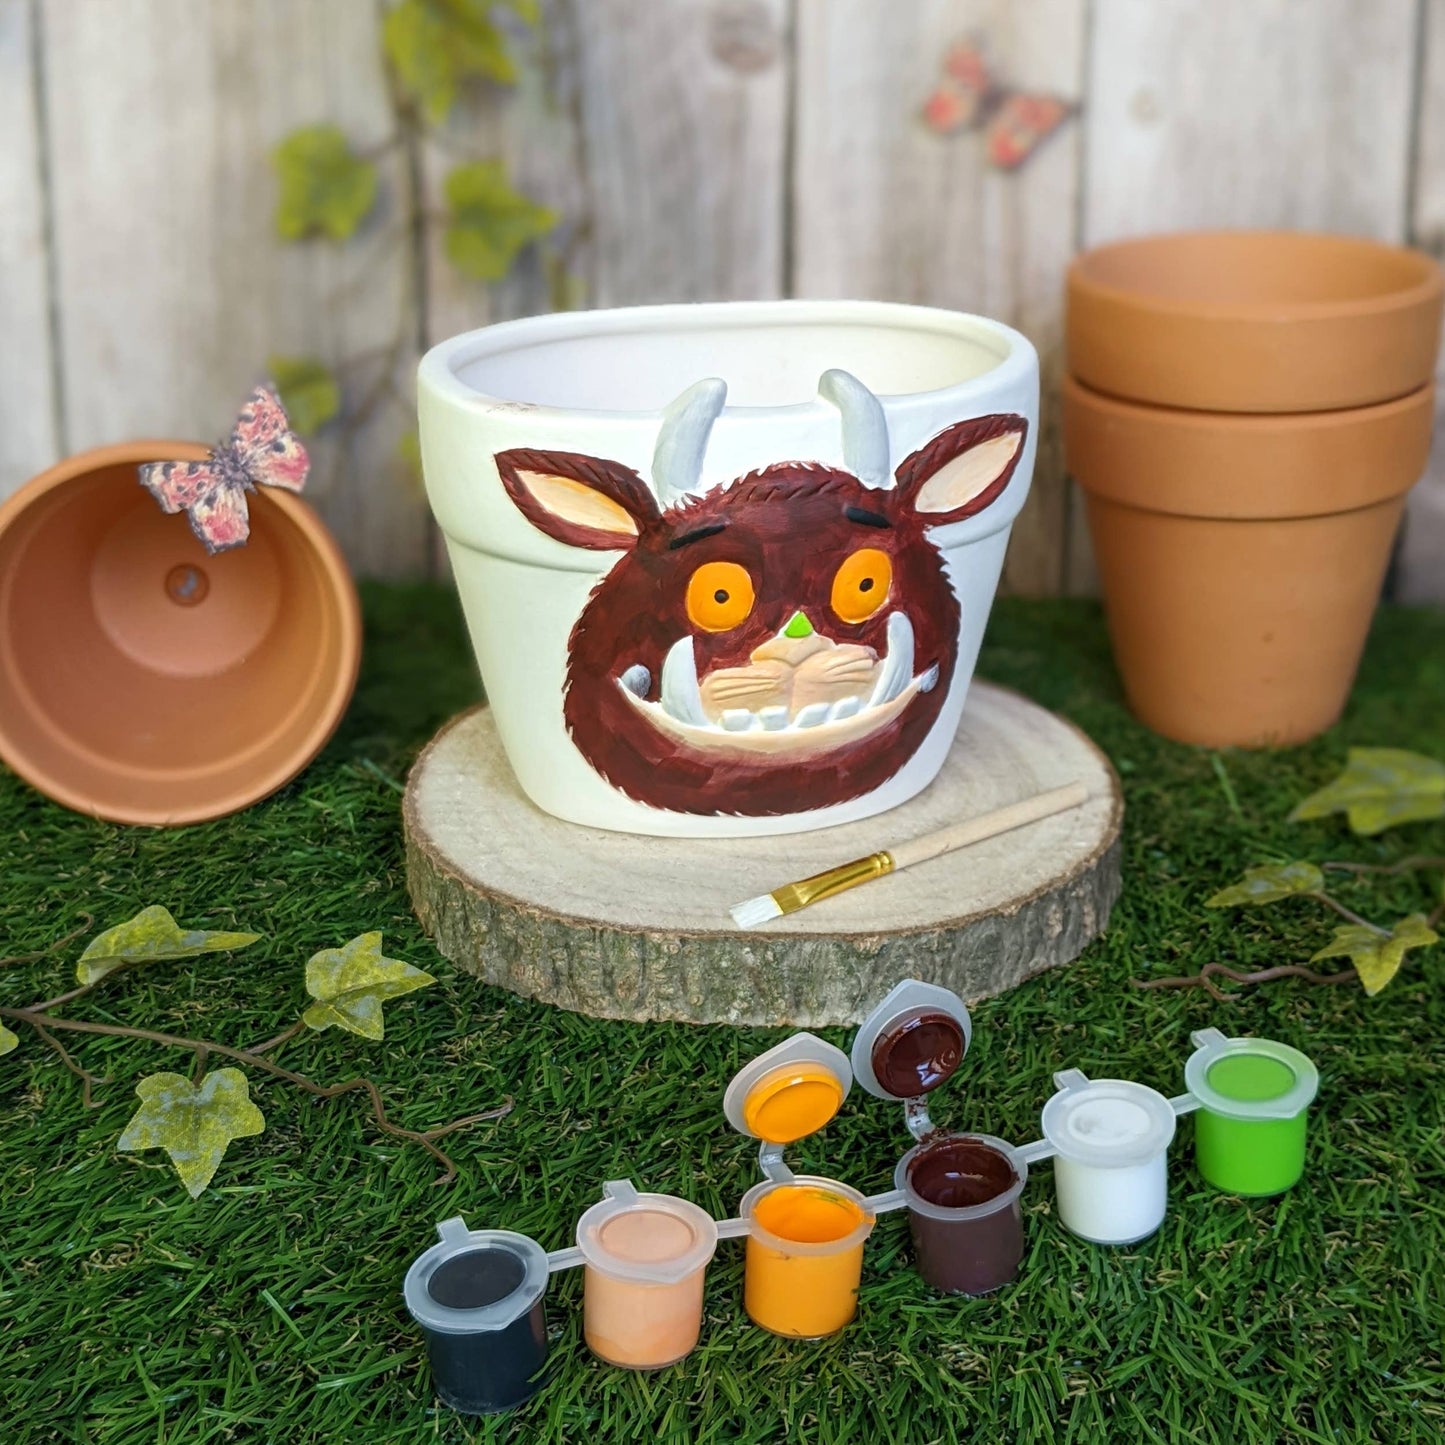 Paint Your Own Plant Pot - The Gruffalo